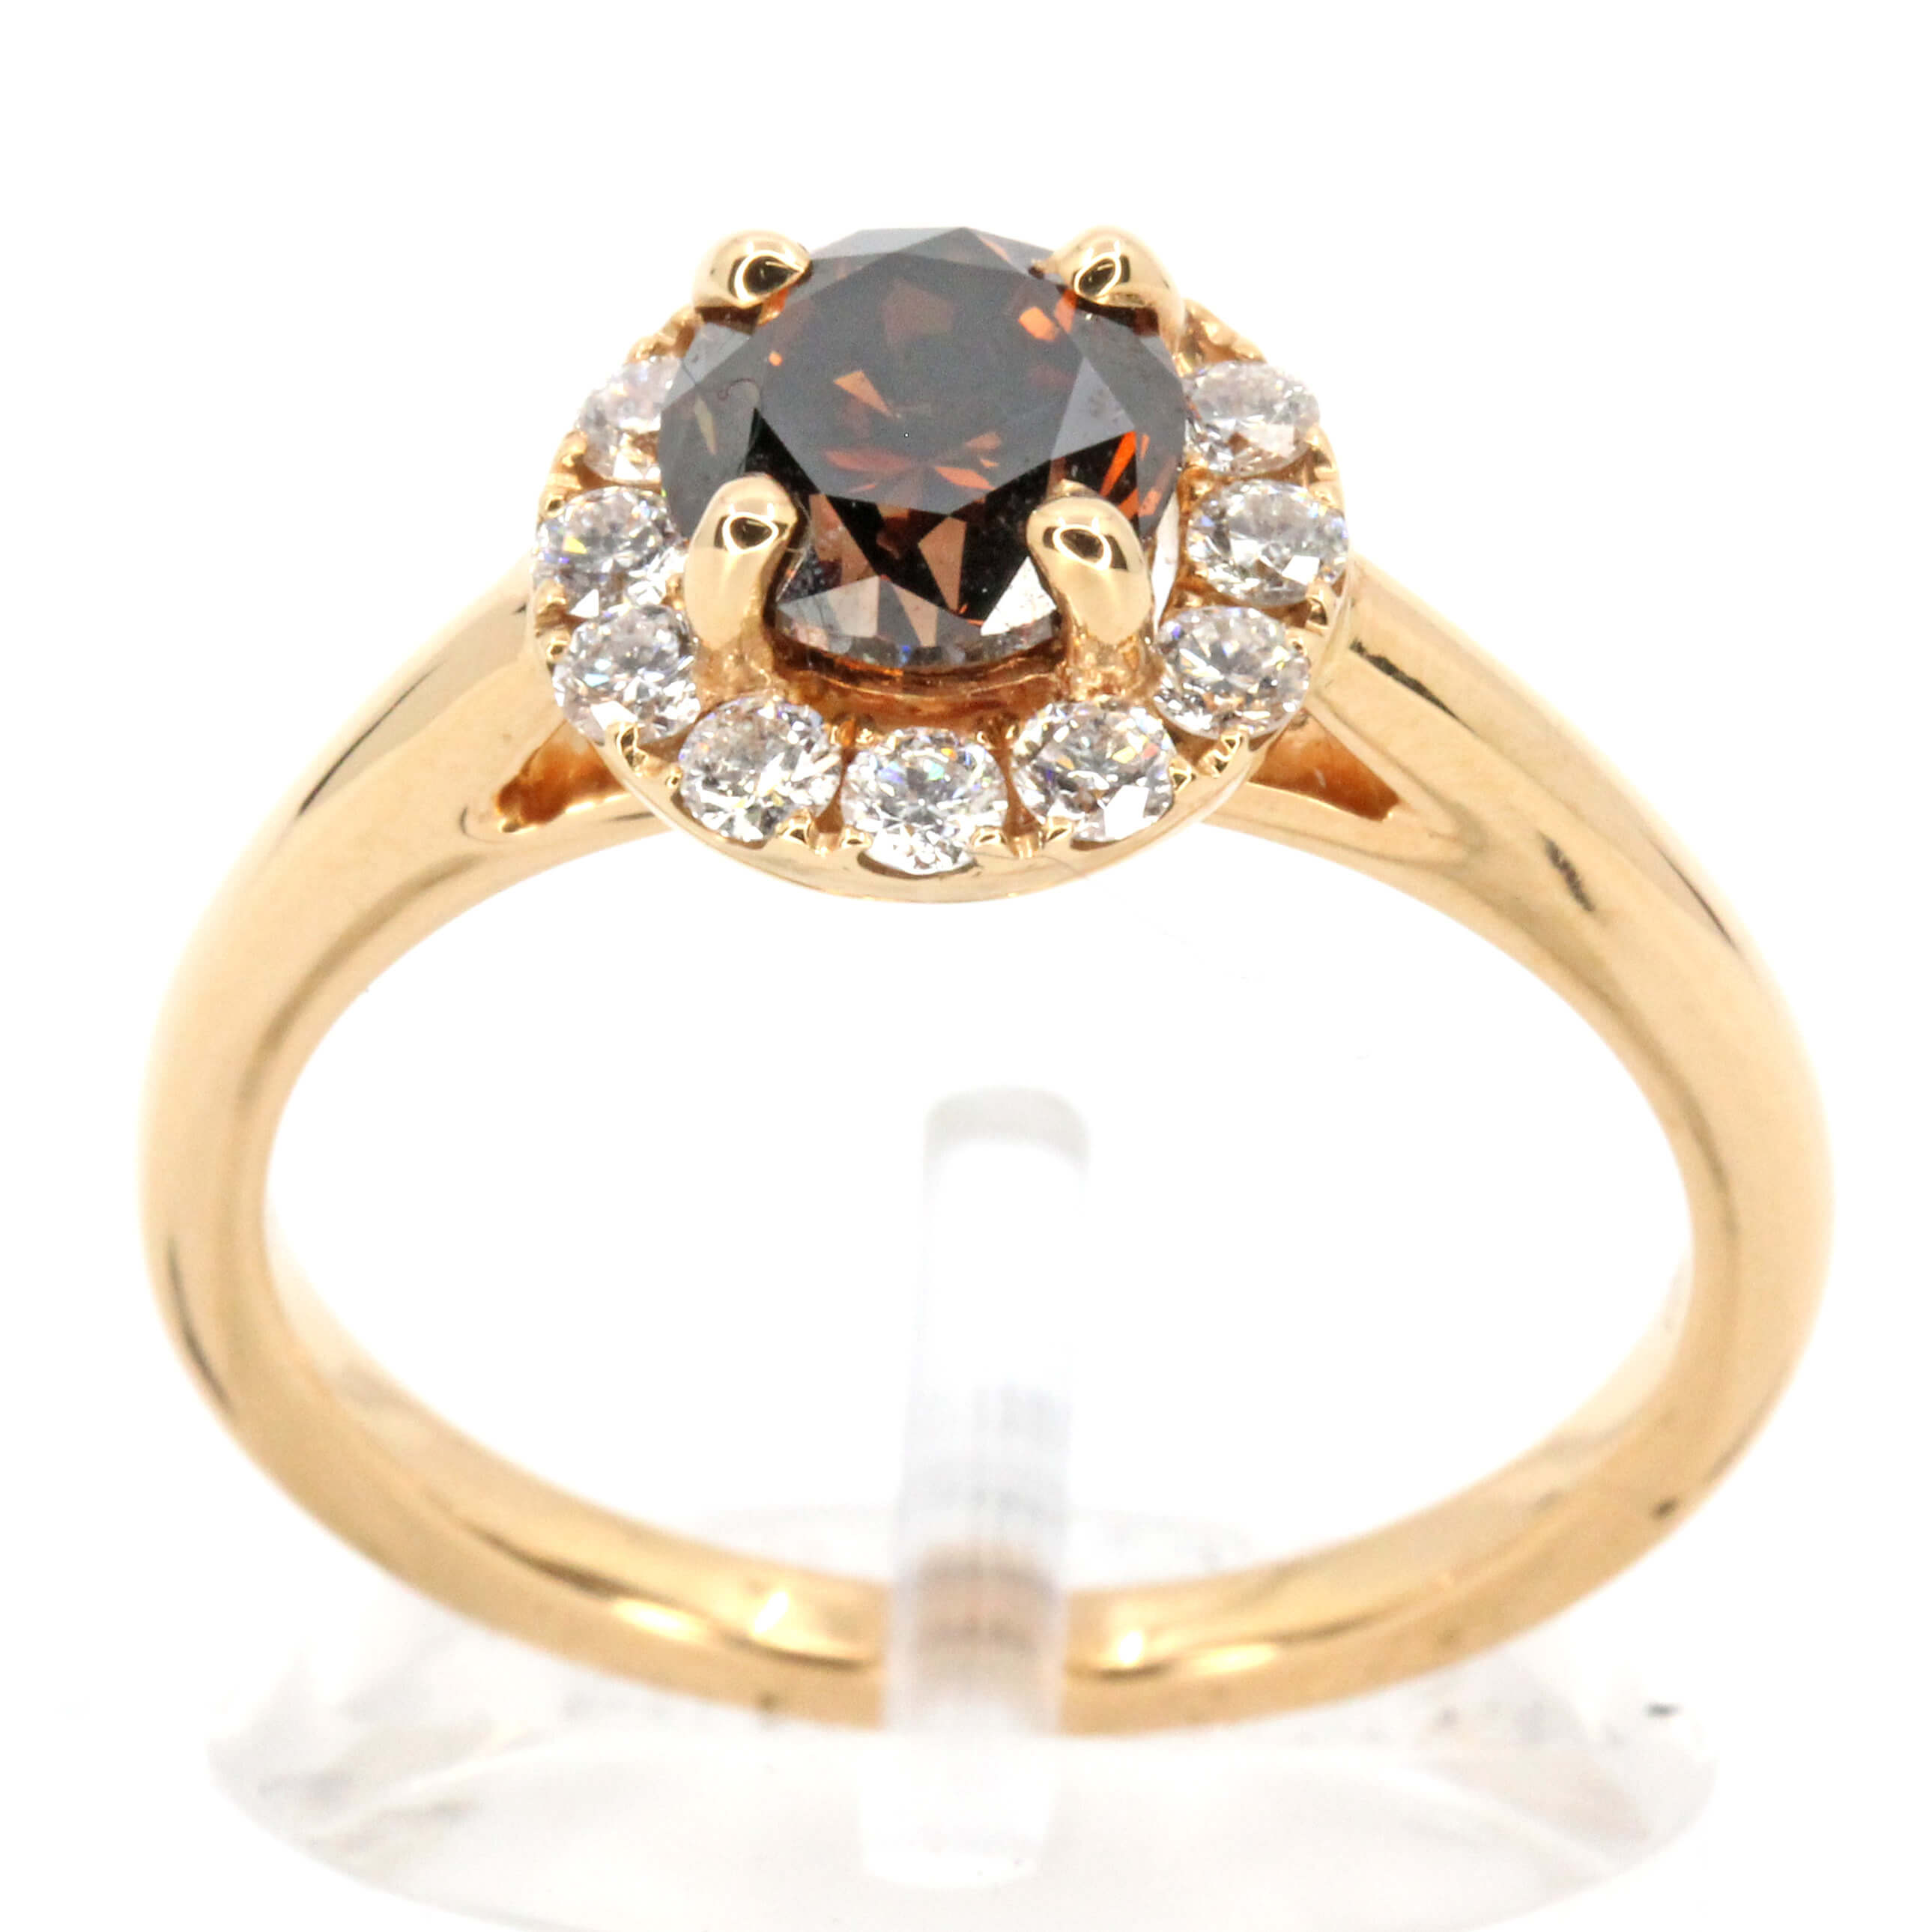 Round Brilliant Cut Chocolate Diamond Ring with Halo of